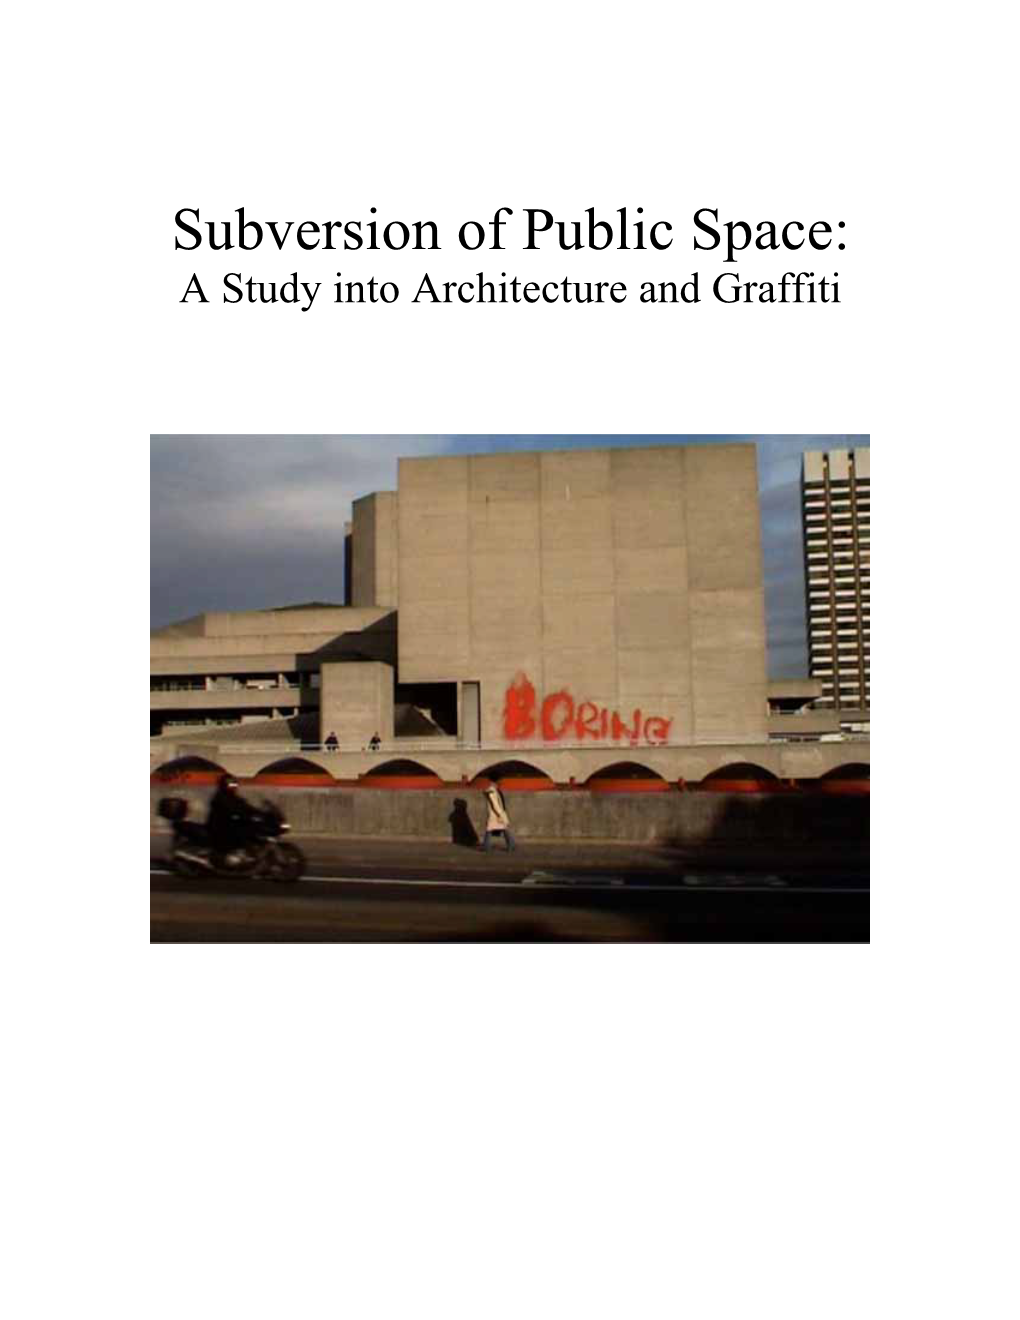 Subversion of Public Space: a Study Into Architecture and Graffiti